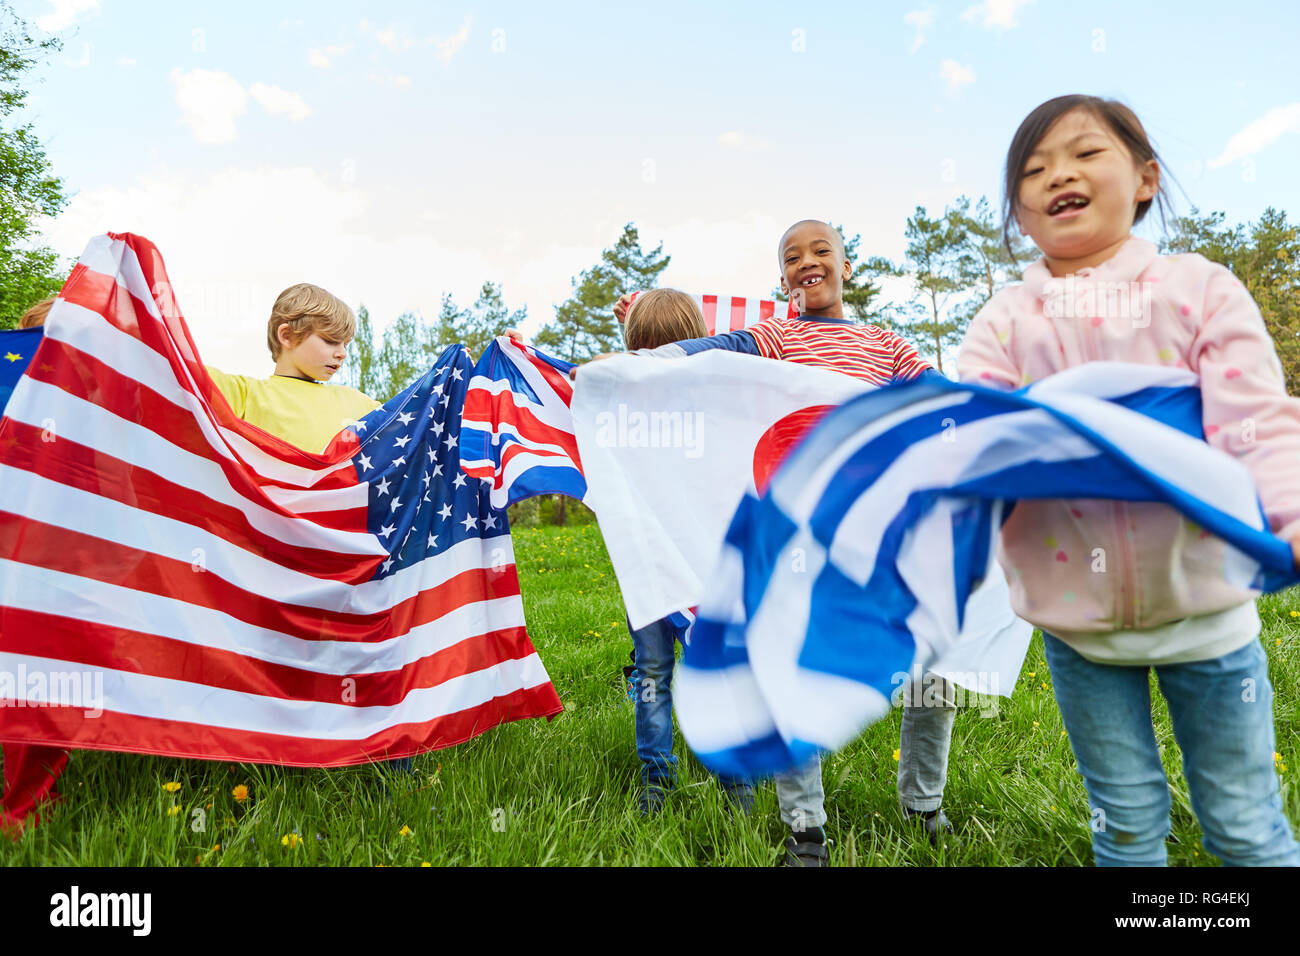 Group of kids with national flags in international kindergarten or youth camp Stock Photo